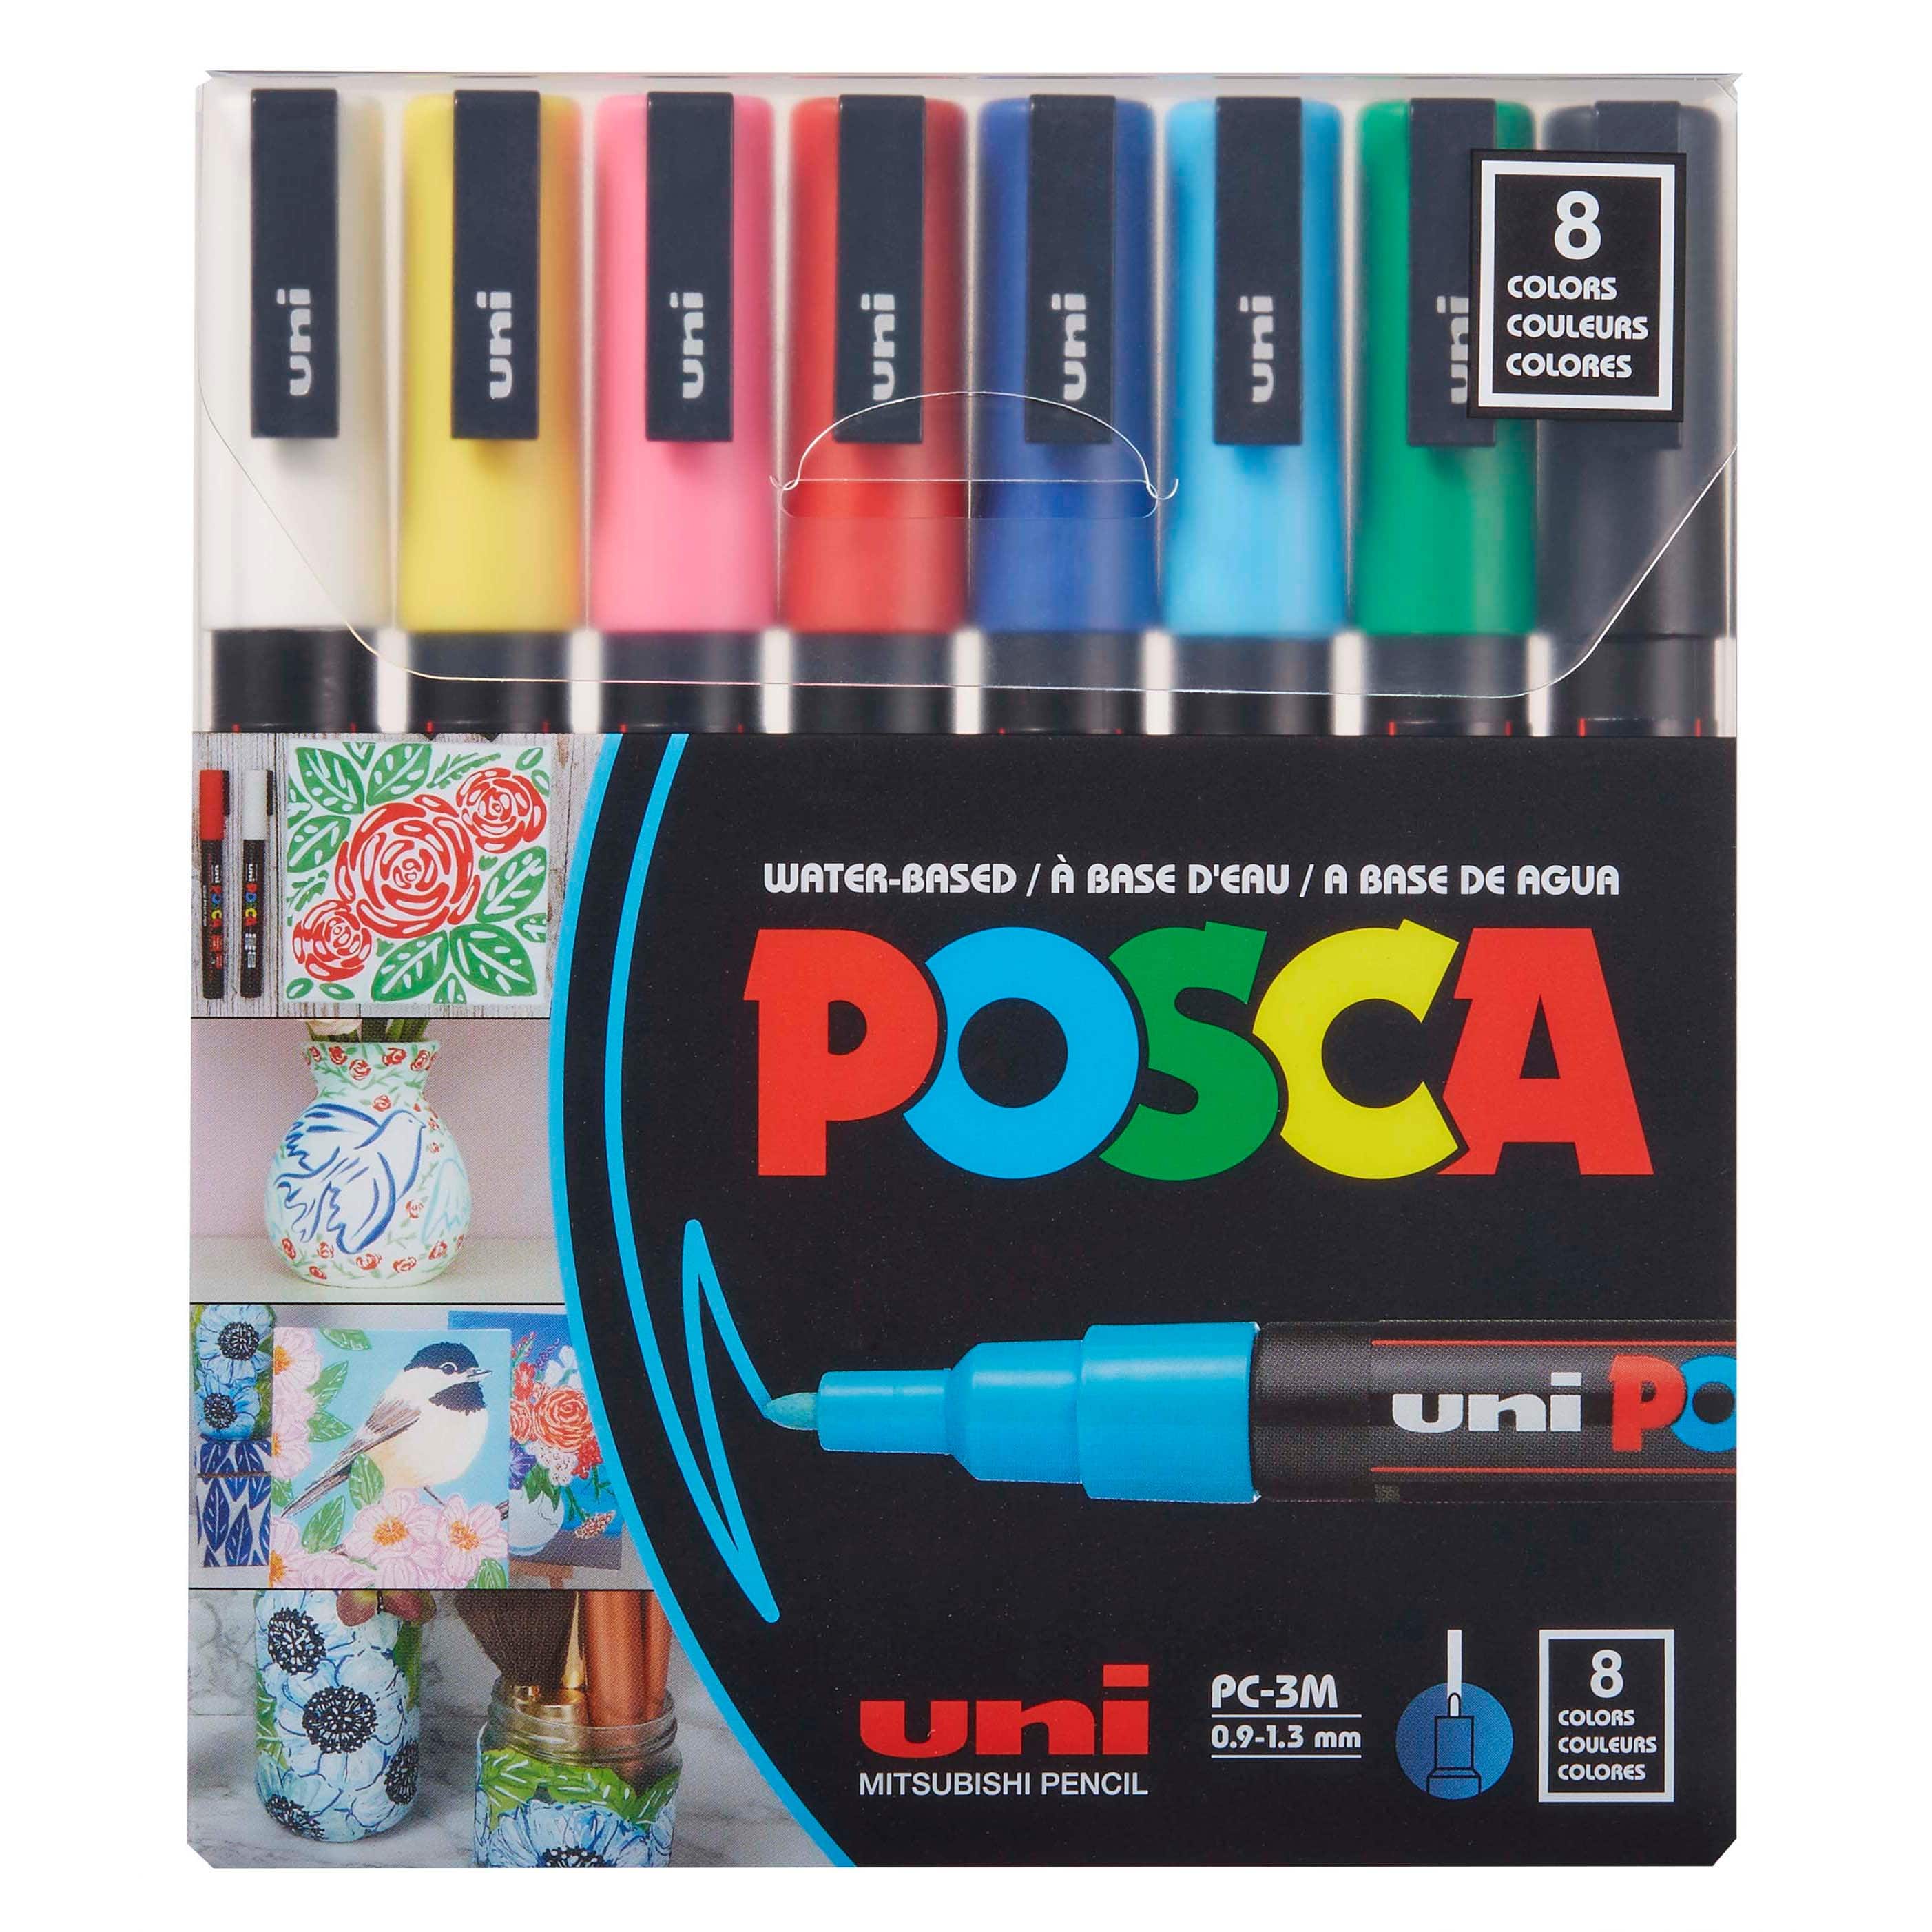 PINTAR Glitter Pens for Adults and Kids - Glitter Stylus Pens Fine Point - Fine  Tip Paint Pens - Acrylic Glitter Markers - Acrylic Paint Pens for Rock  Painting,Wood,Glass,Leather,Shoes - Pack of